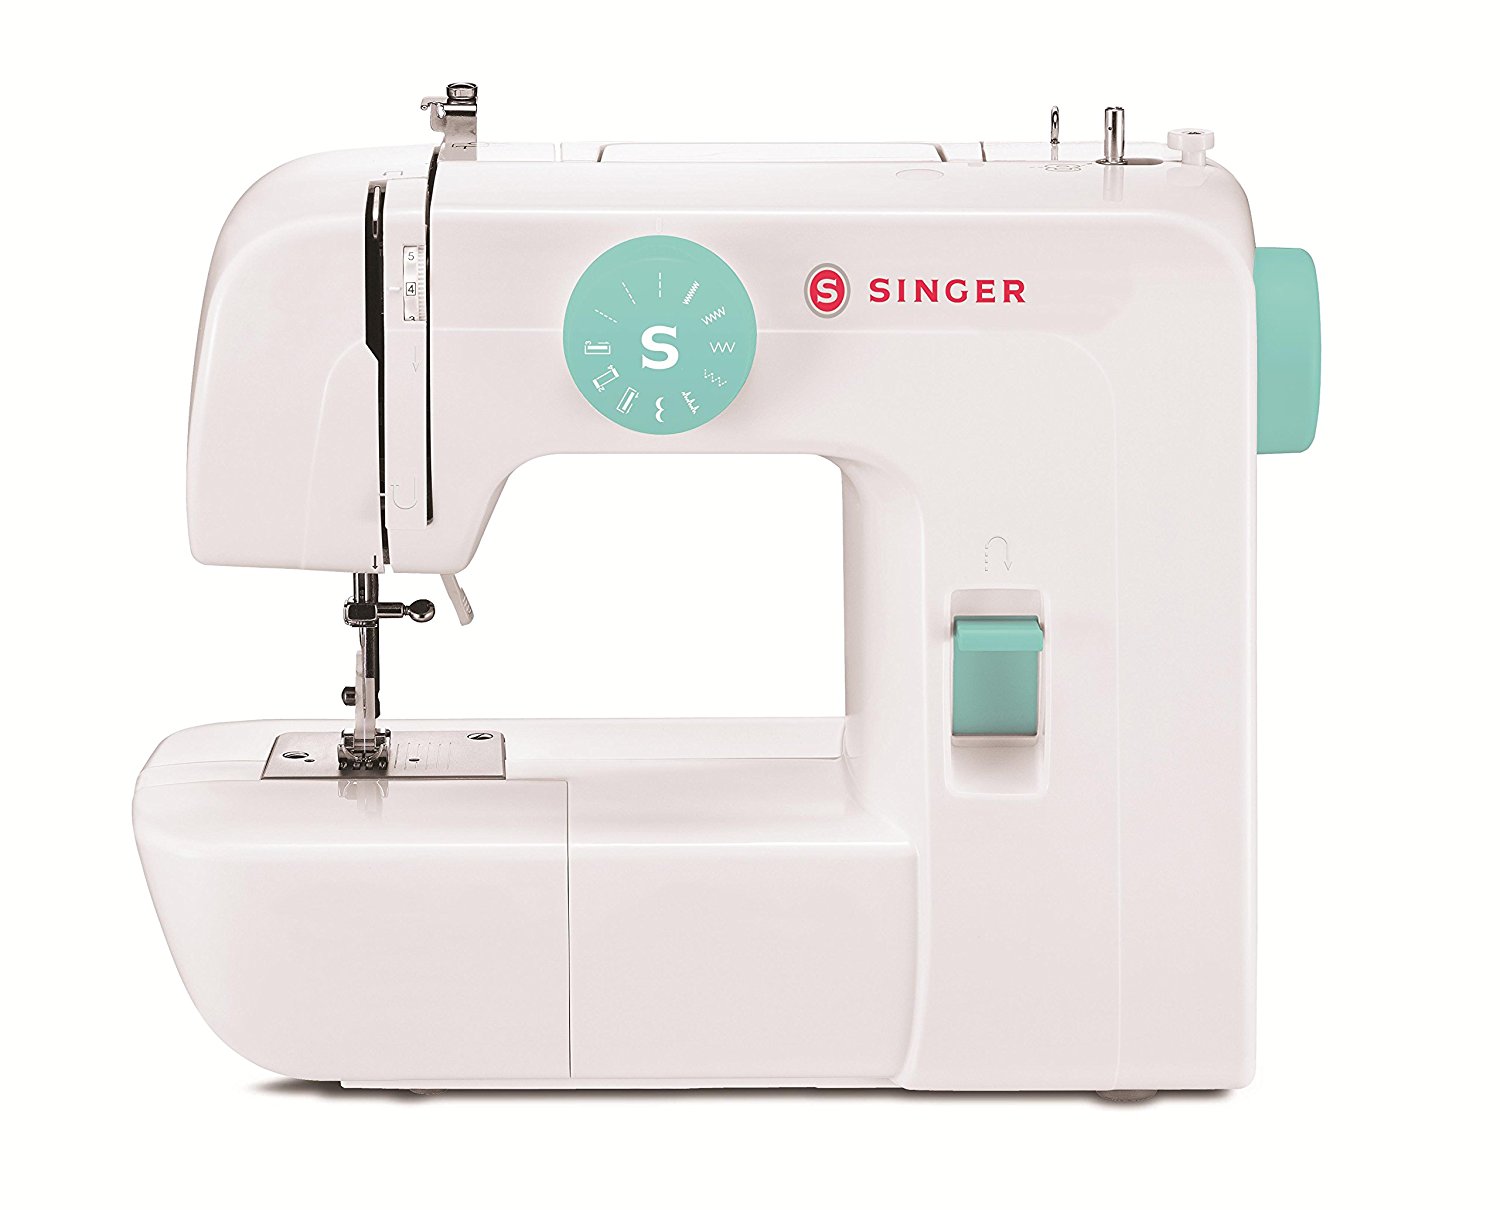 SINGER 1234 Portable Sewing Machine with Free Online Owner’s Class and Tote Bag Project Only $61.18!